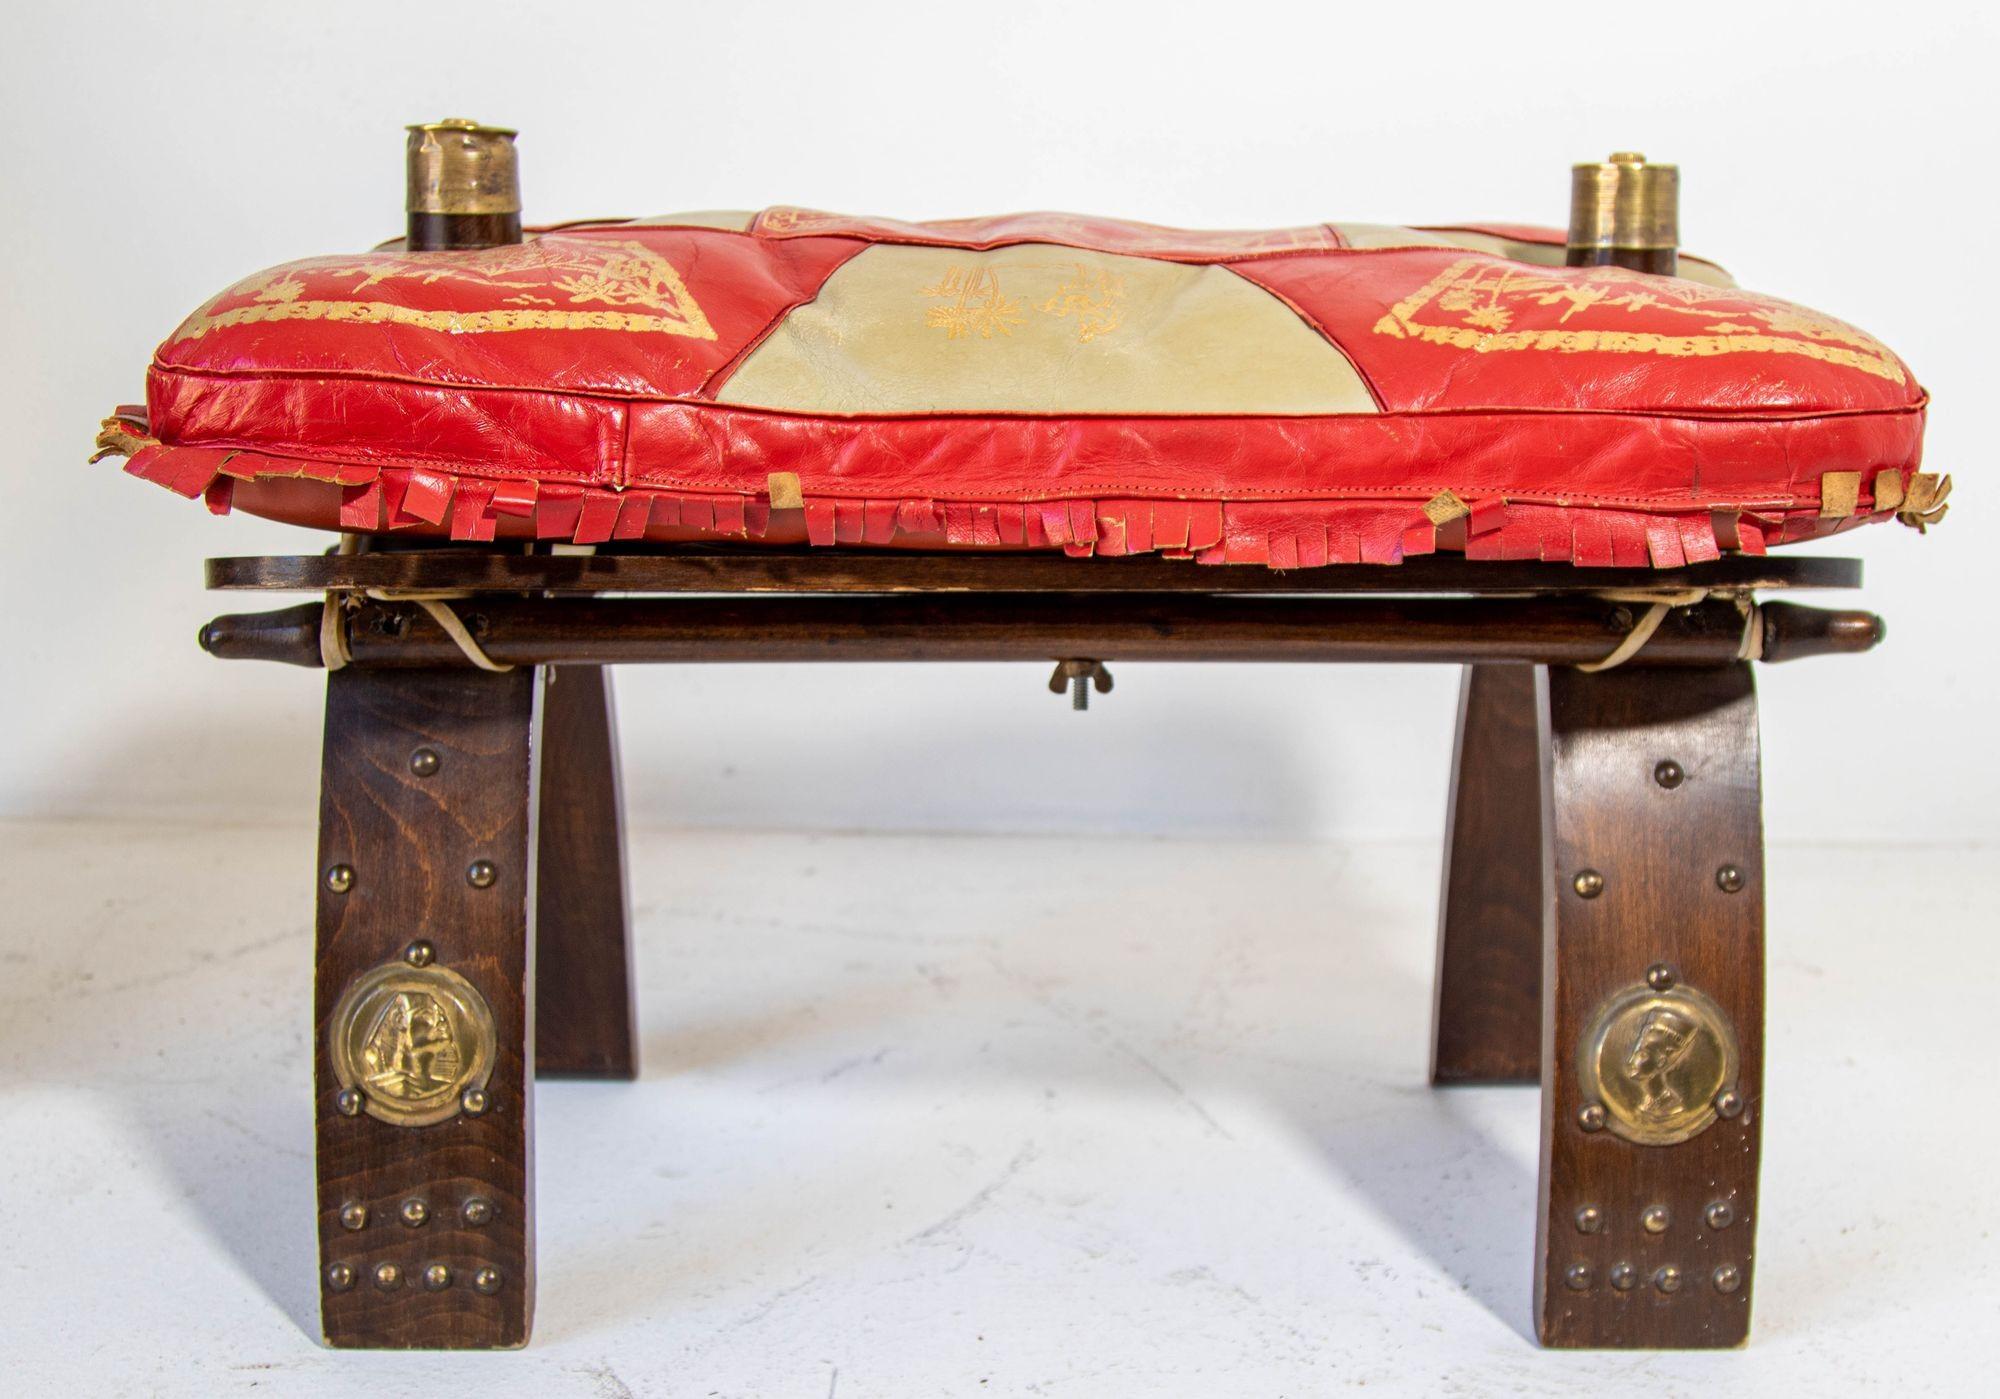 Hand-Crafted 1950s Egyptian Ottoman Camel Saddle Stool with Red and Gold Cushion For Sale